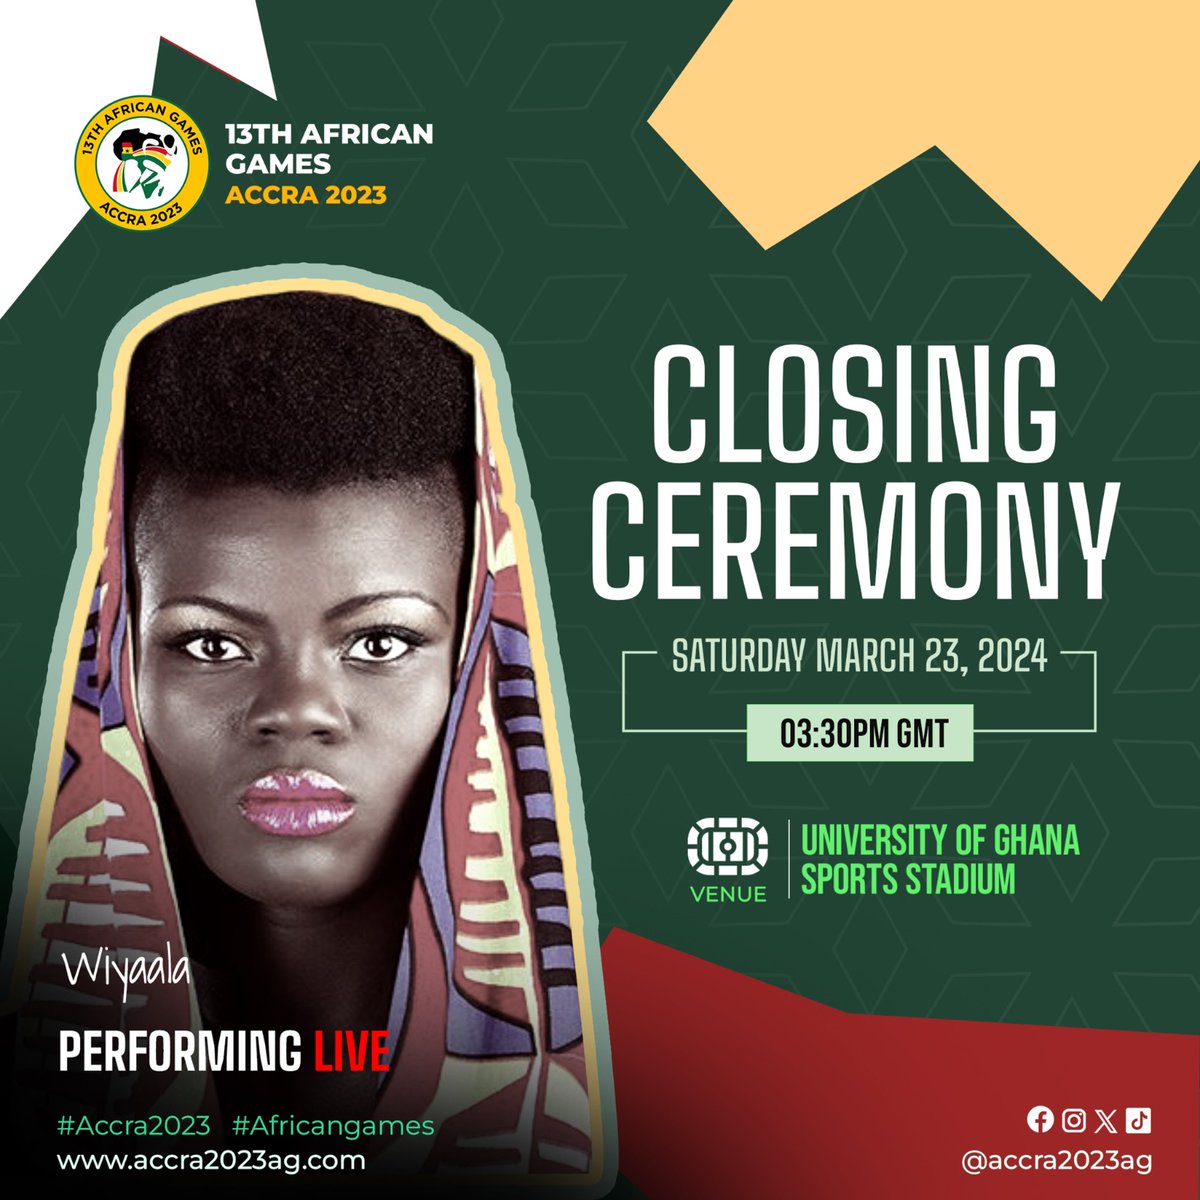 Catch the dazzling ending of the 
#AfricanGames2023 with 🎇 Stonebwoy, Wiyaala, & Many more artists live at University of Ghana Sports Stadium 🏟 Tonight 
 Epic fireworks, FREE T-shirts, and refreshments courtesy of our sponsors. Be part of the magic. 
#AfricanGames